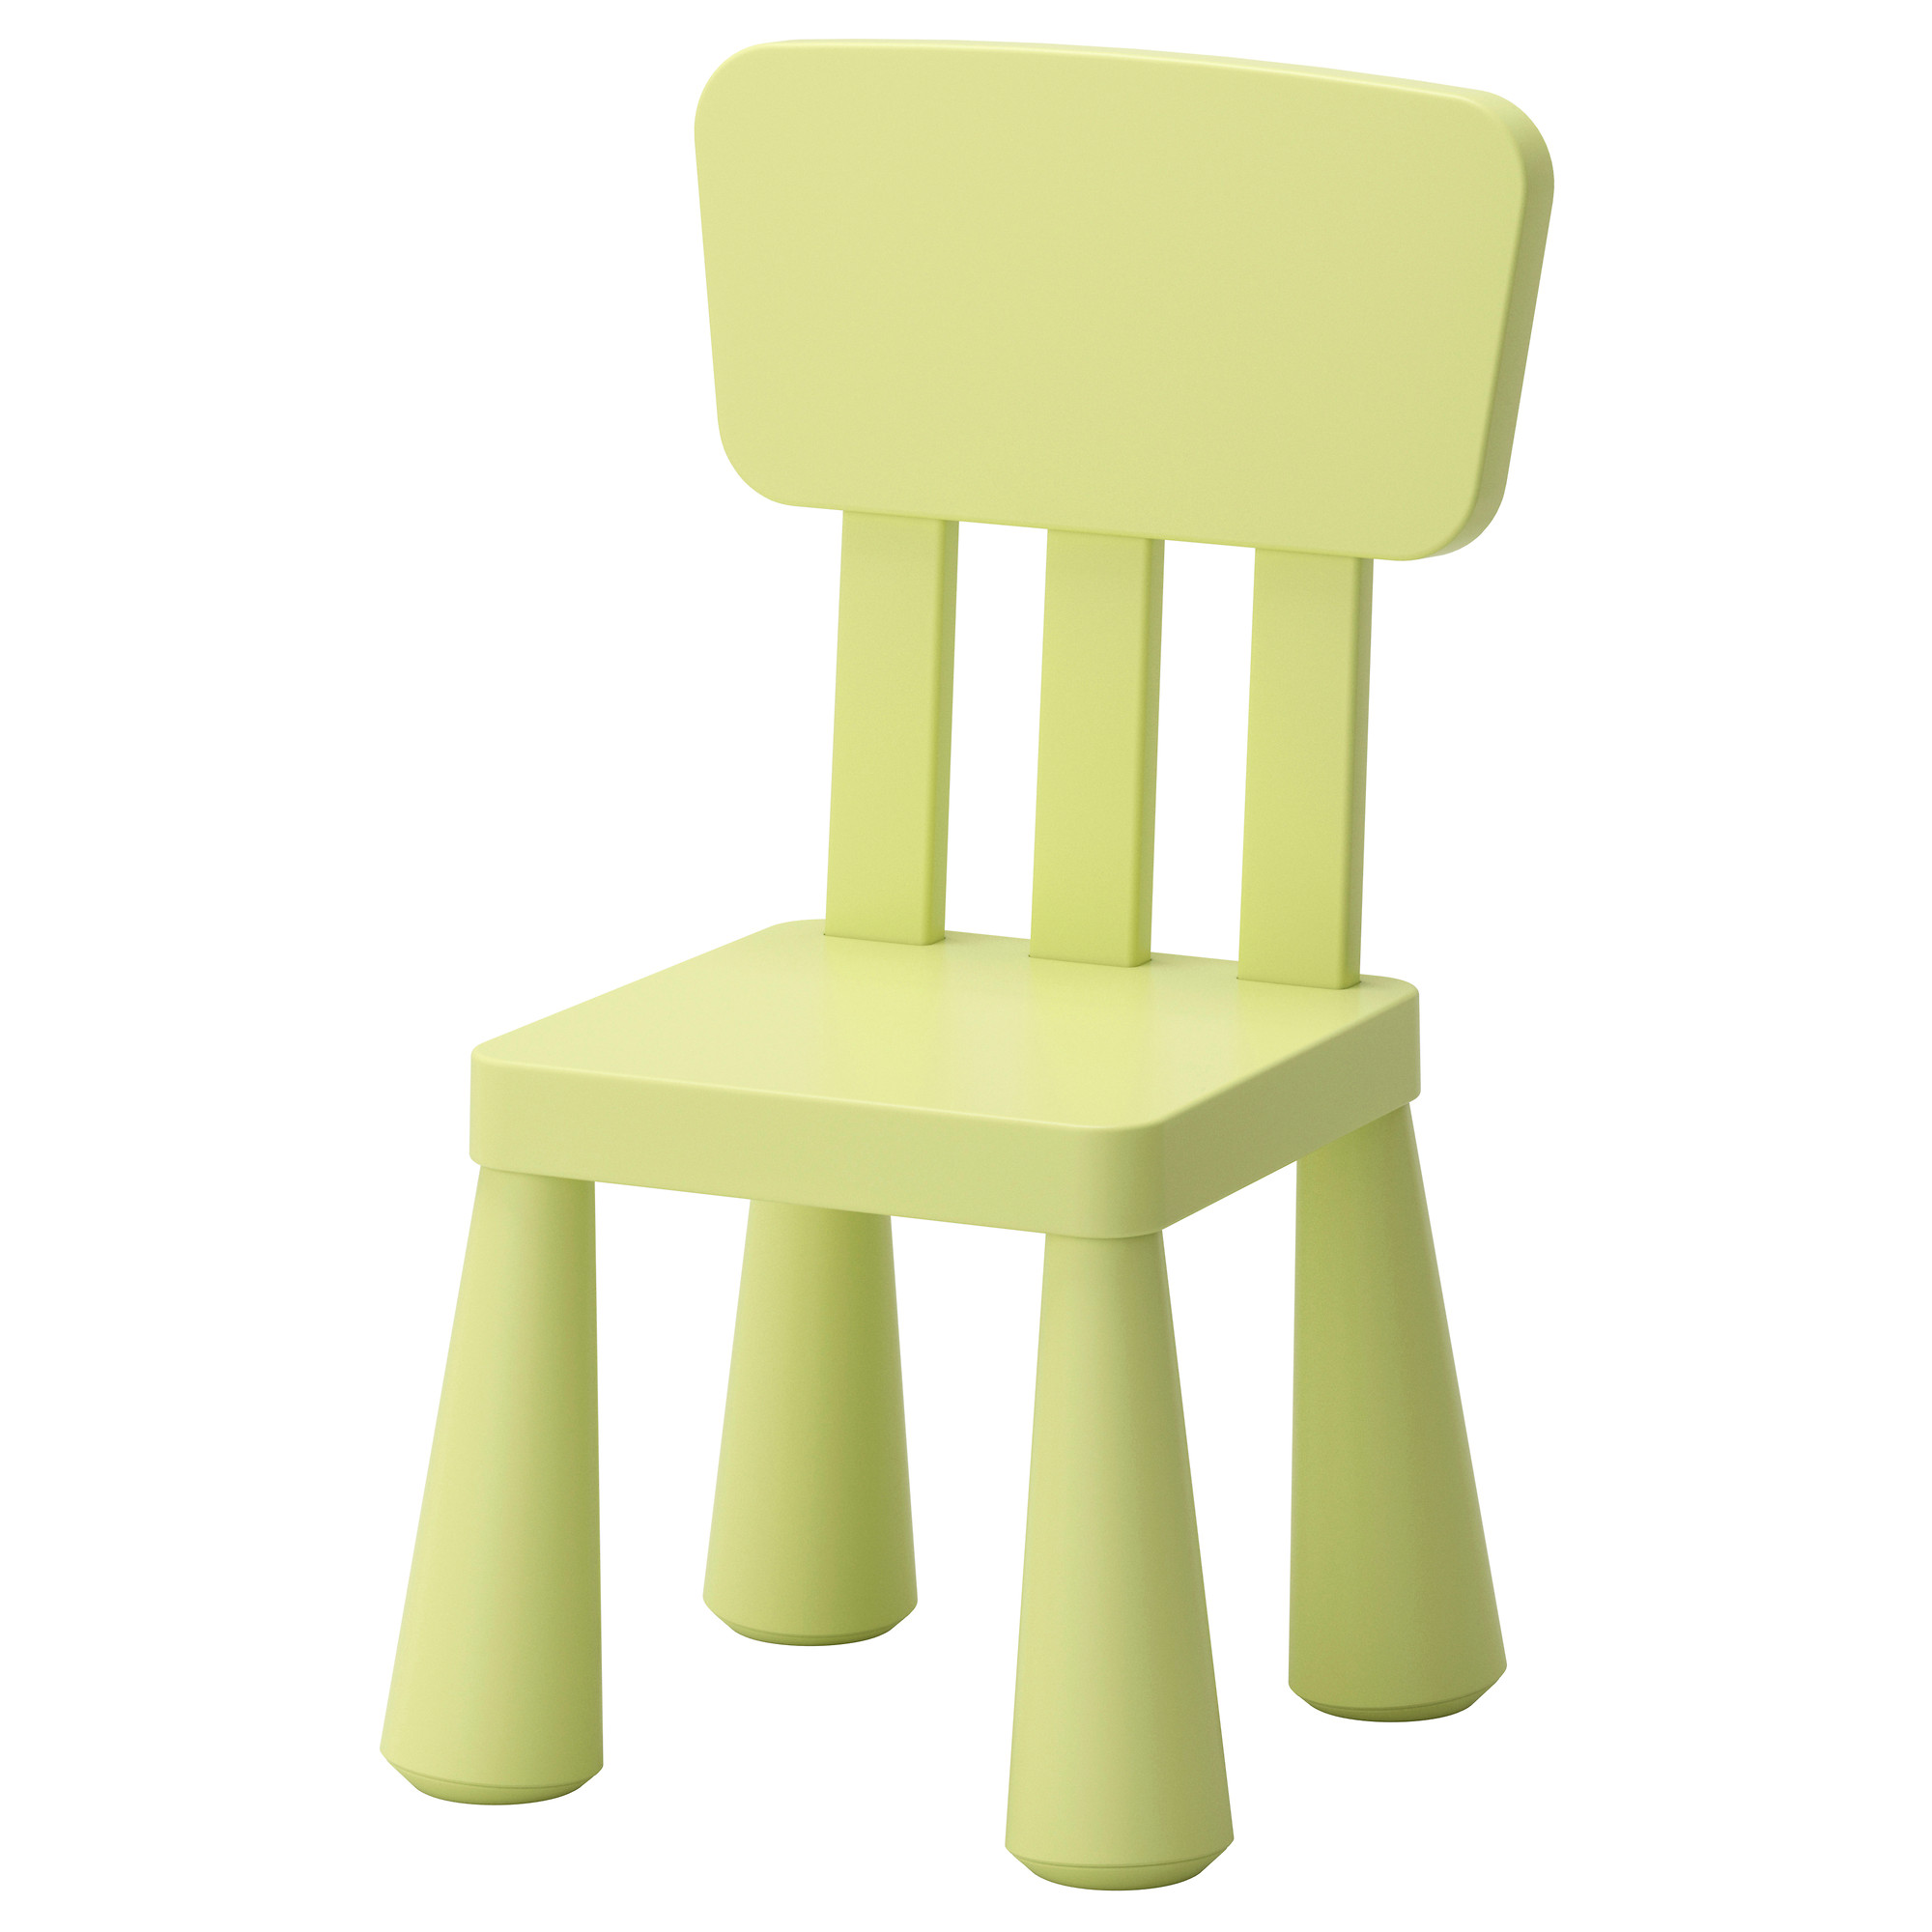 Pictures of MAMMUT childrenu0027s chair, indoor/outdoor light green, light green Width: 15 3 plastic toddler chairs